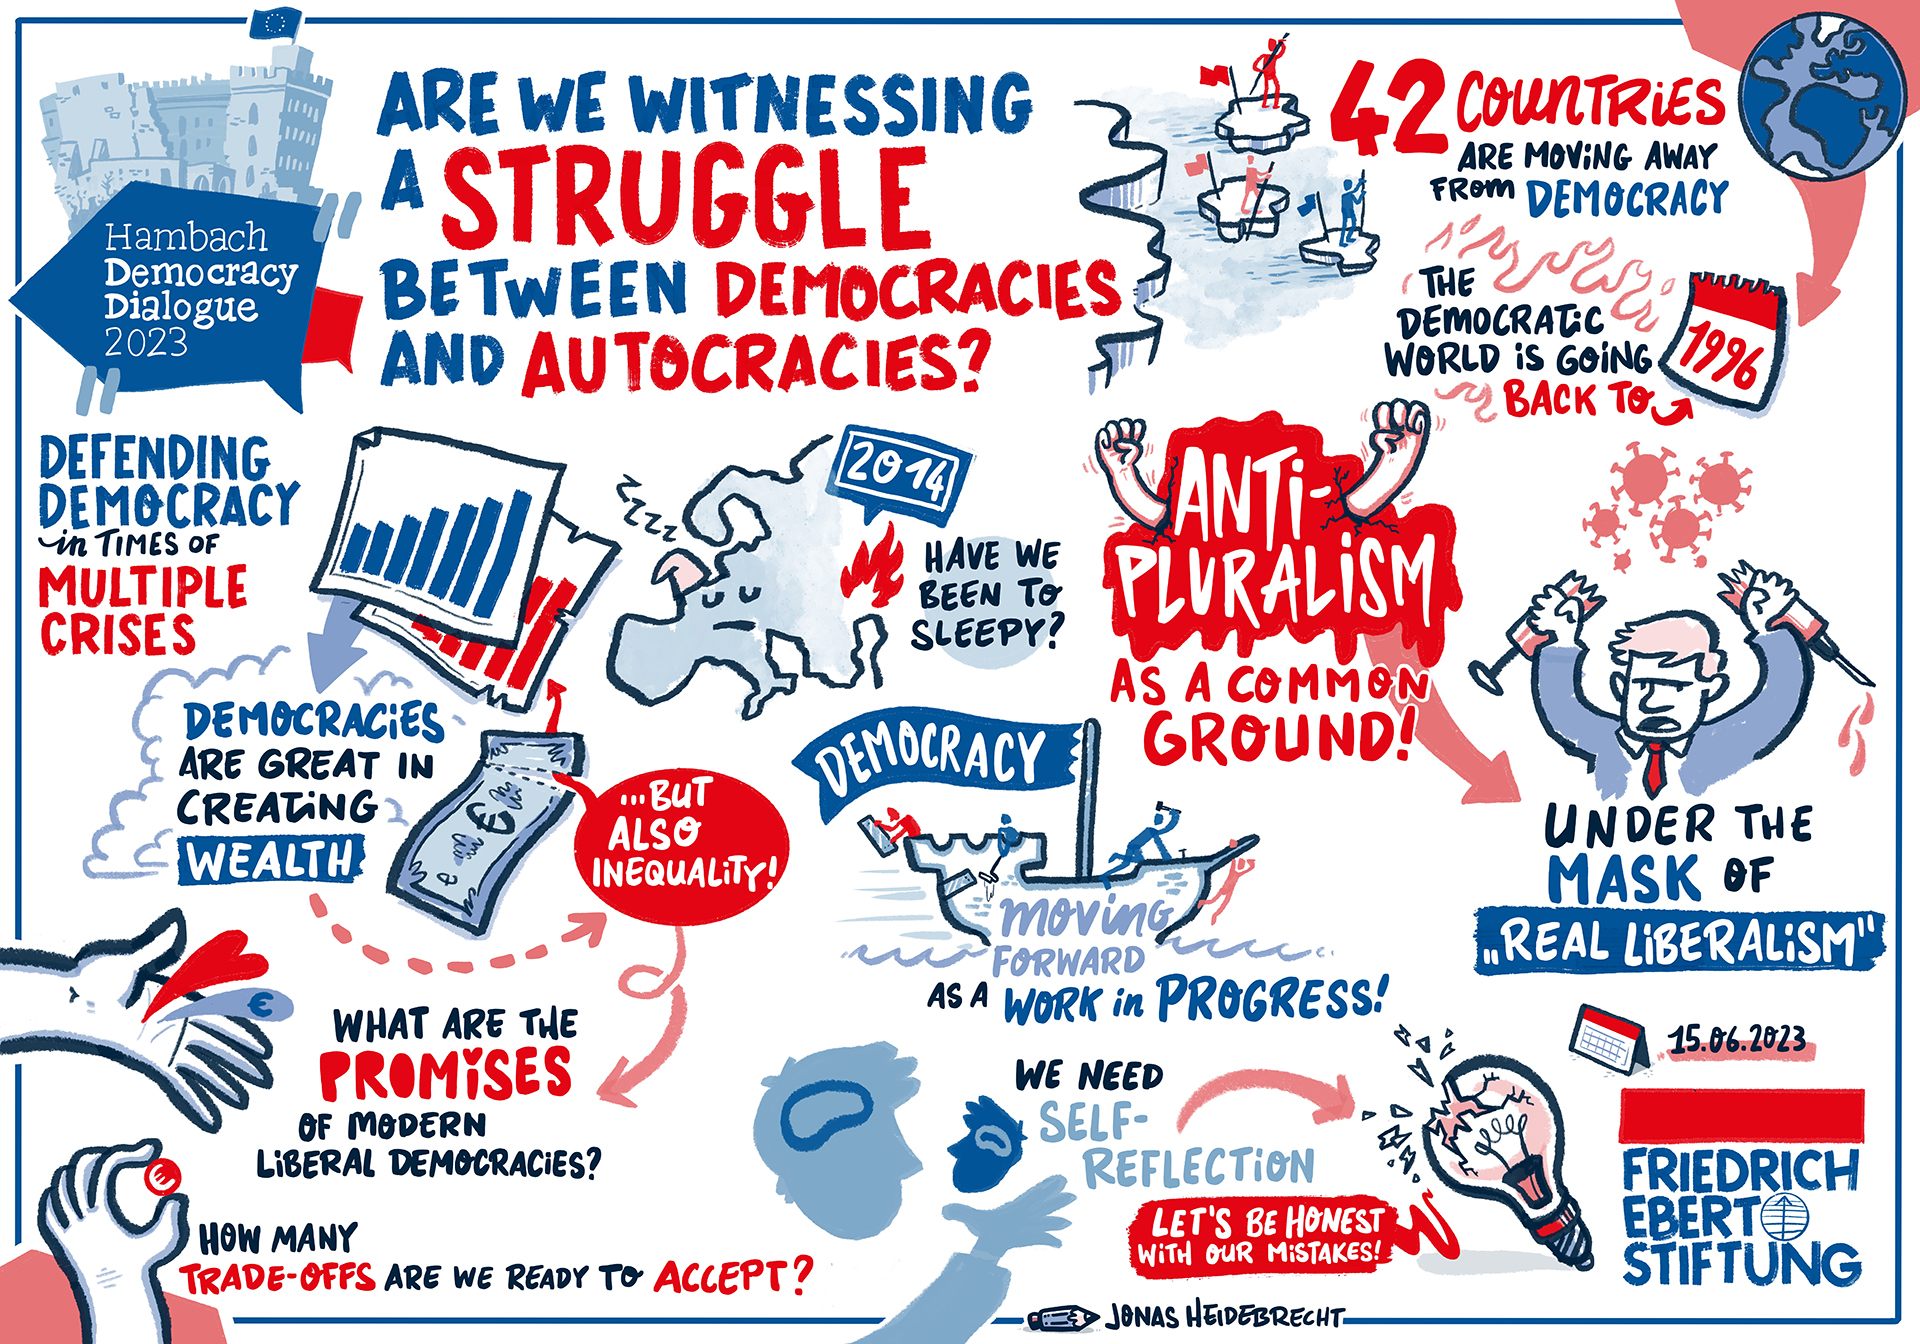 {f:if(condition: '0', then: '', else: 'Graphic Recording Session 1 Hambacher Demokratie Dialog 2023)}}